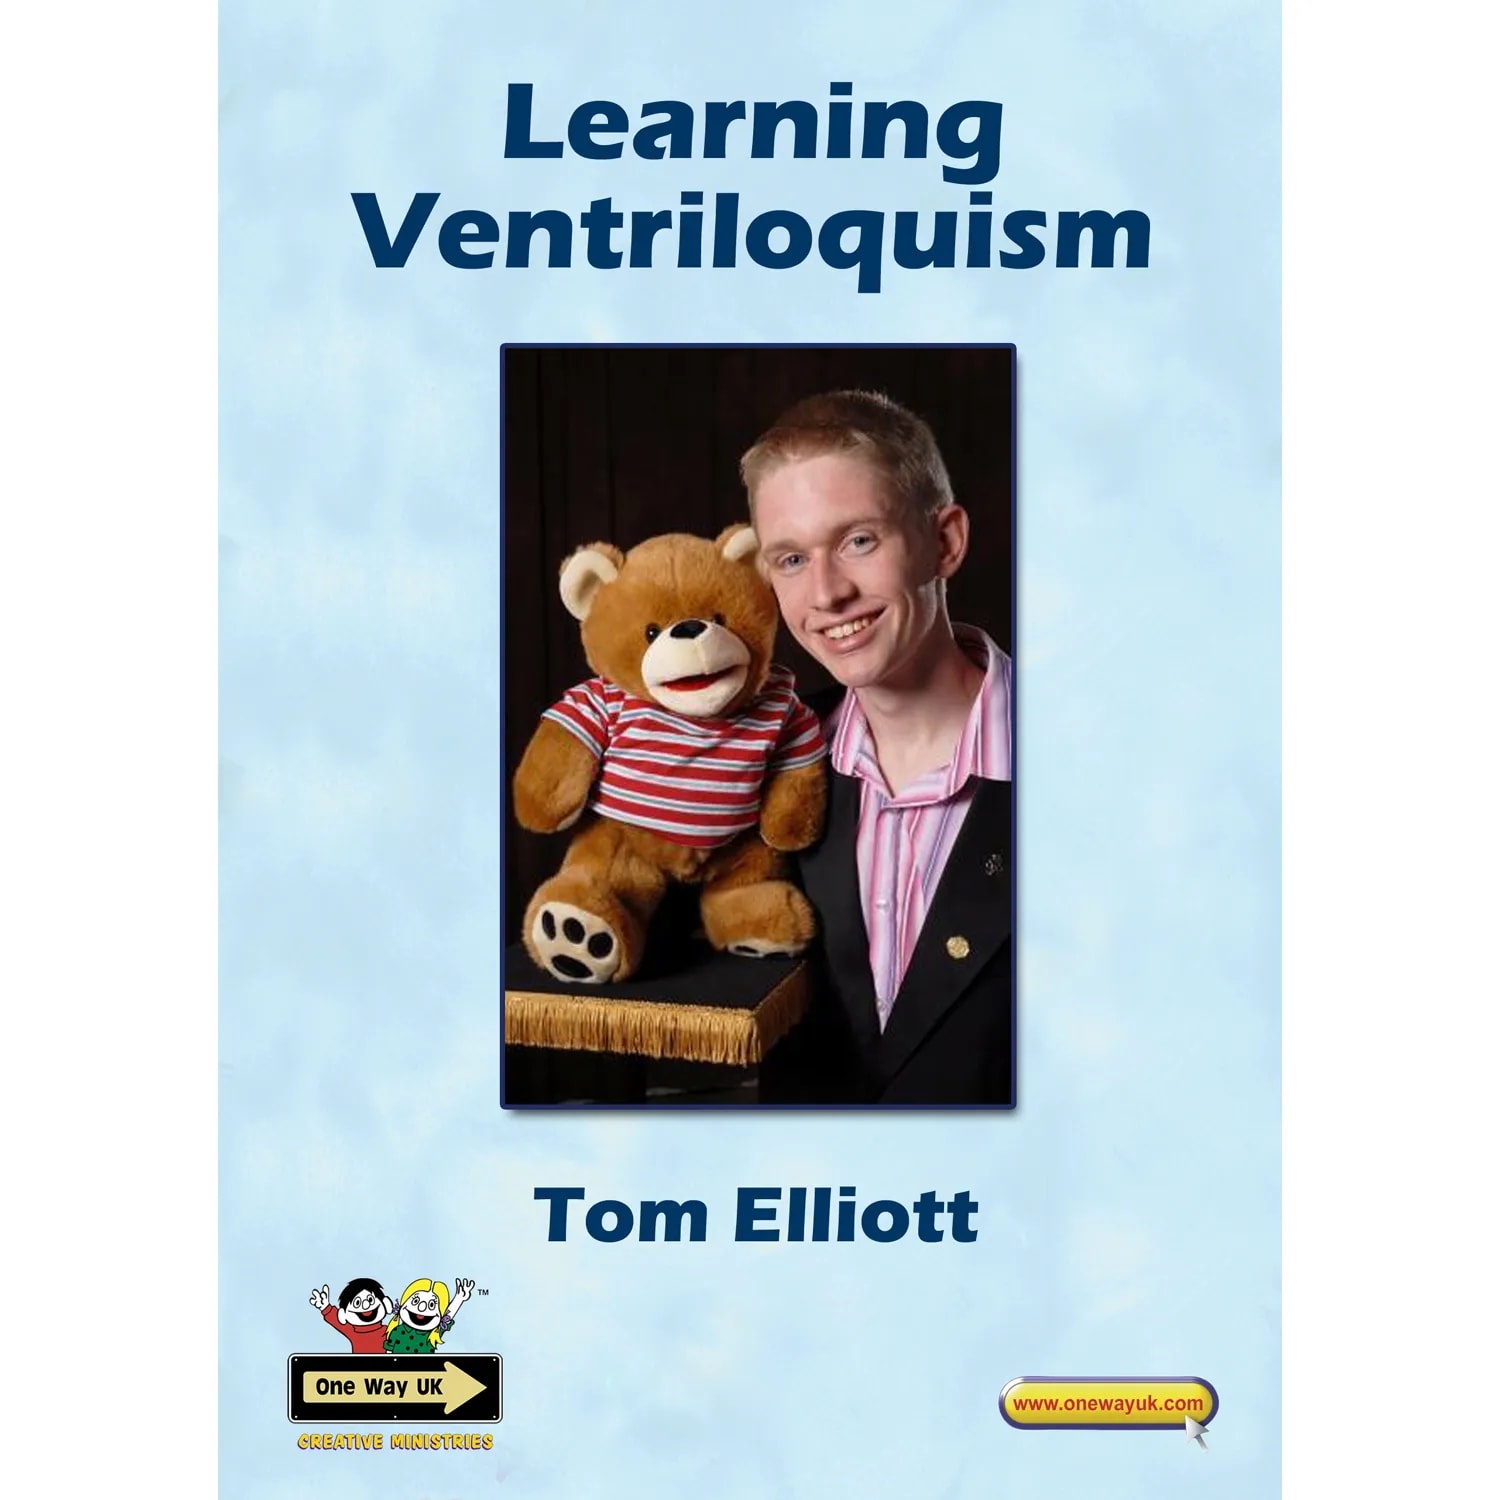 Learning Ventriloquism